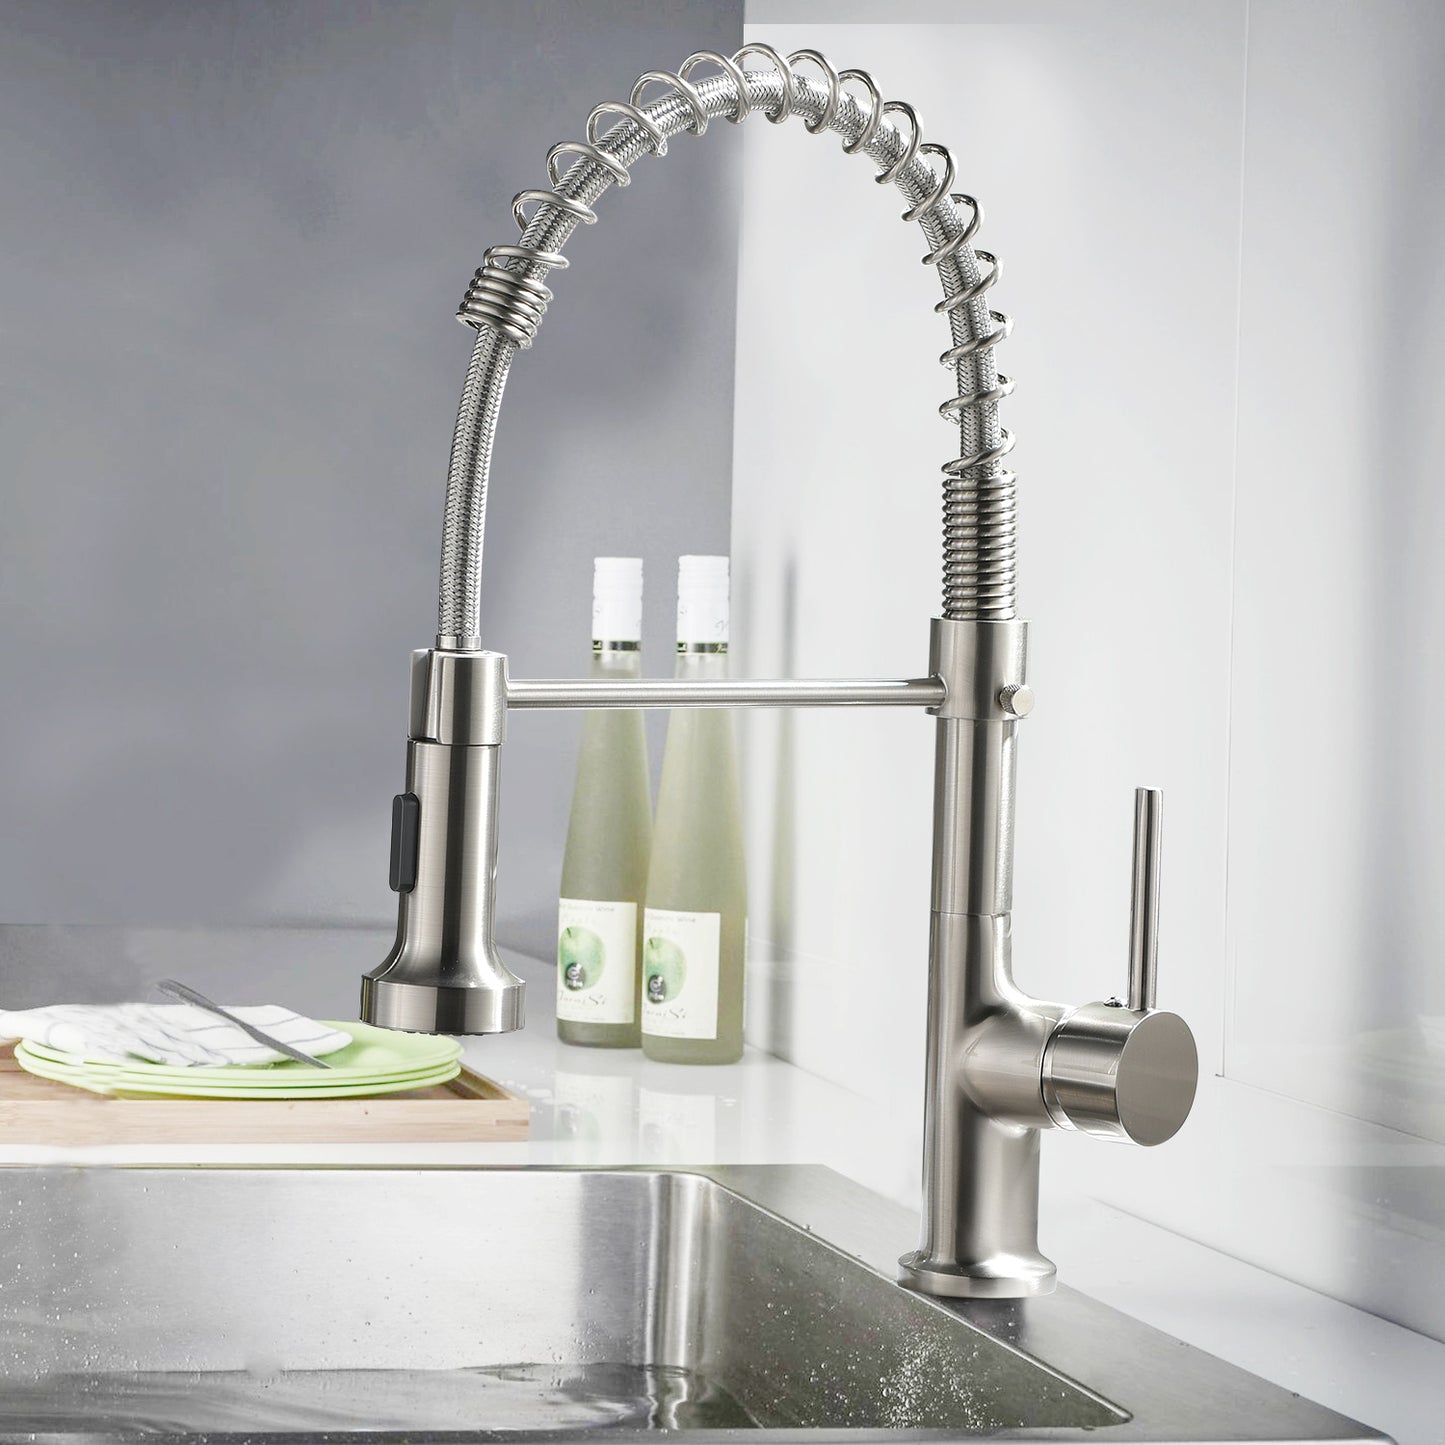 AvaMalis A|M Aquae The new model is beautiful and durable Single Handle Pull-Down Sprayer Kitchen Faucet in Black+Gold